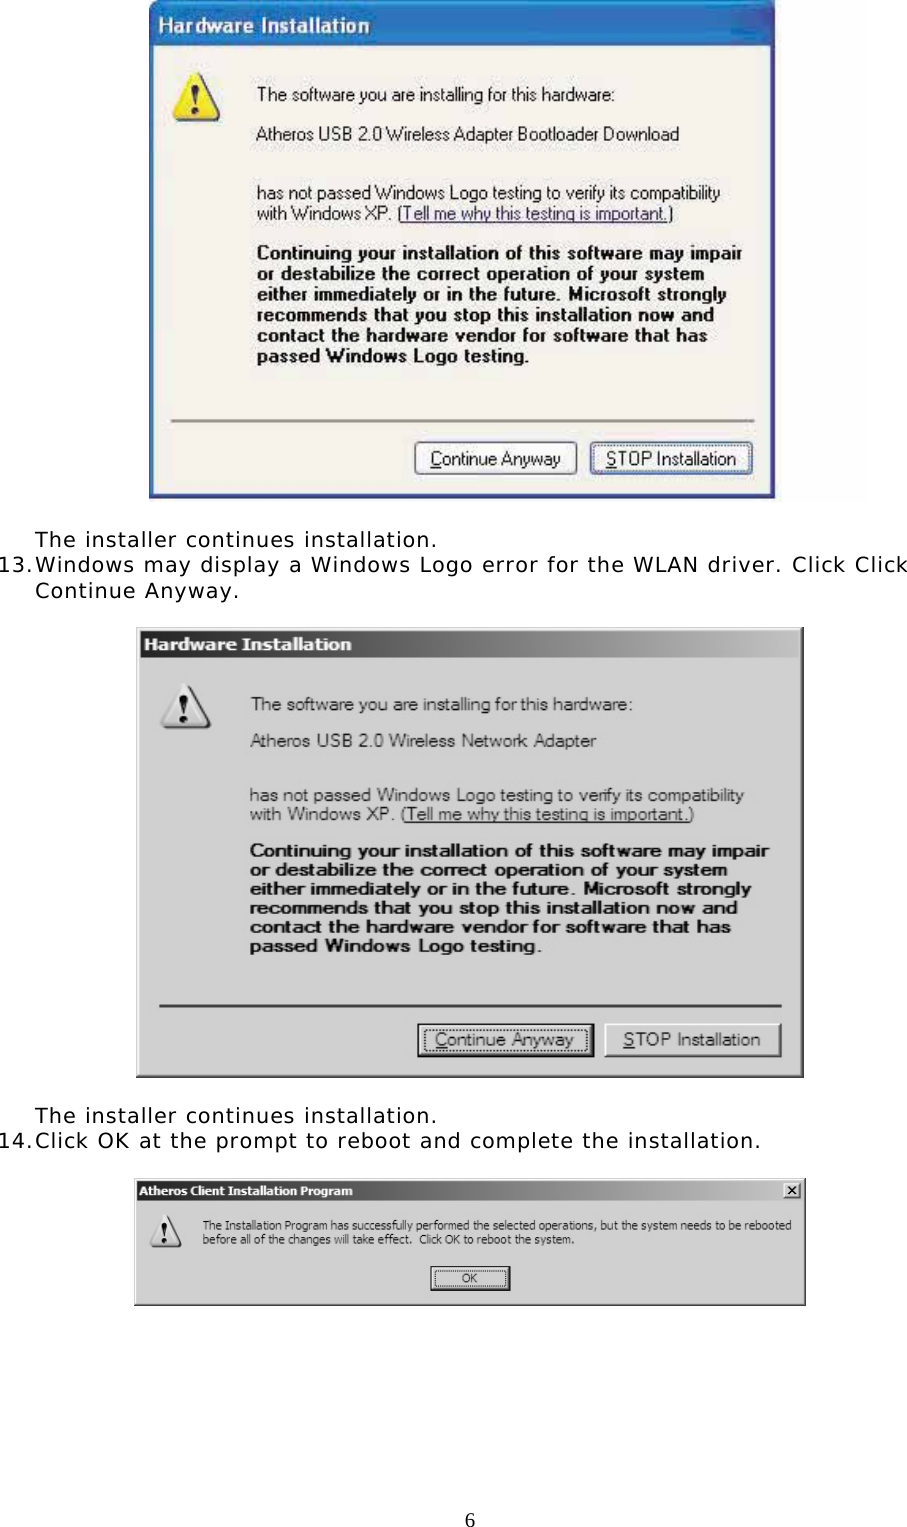  6             The installer continues installation. 13. Windows may display a Windows Logo error for the WLAN driver. Click Click Continue Anyway.     The installer continues installation. 14. Click OK at the prompt to reboot and complete the installation.            